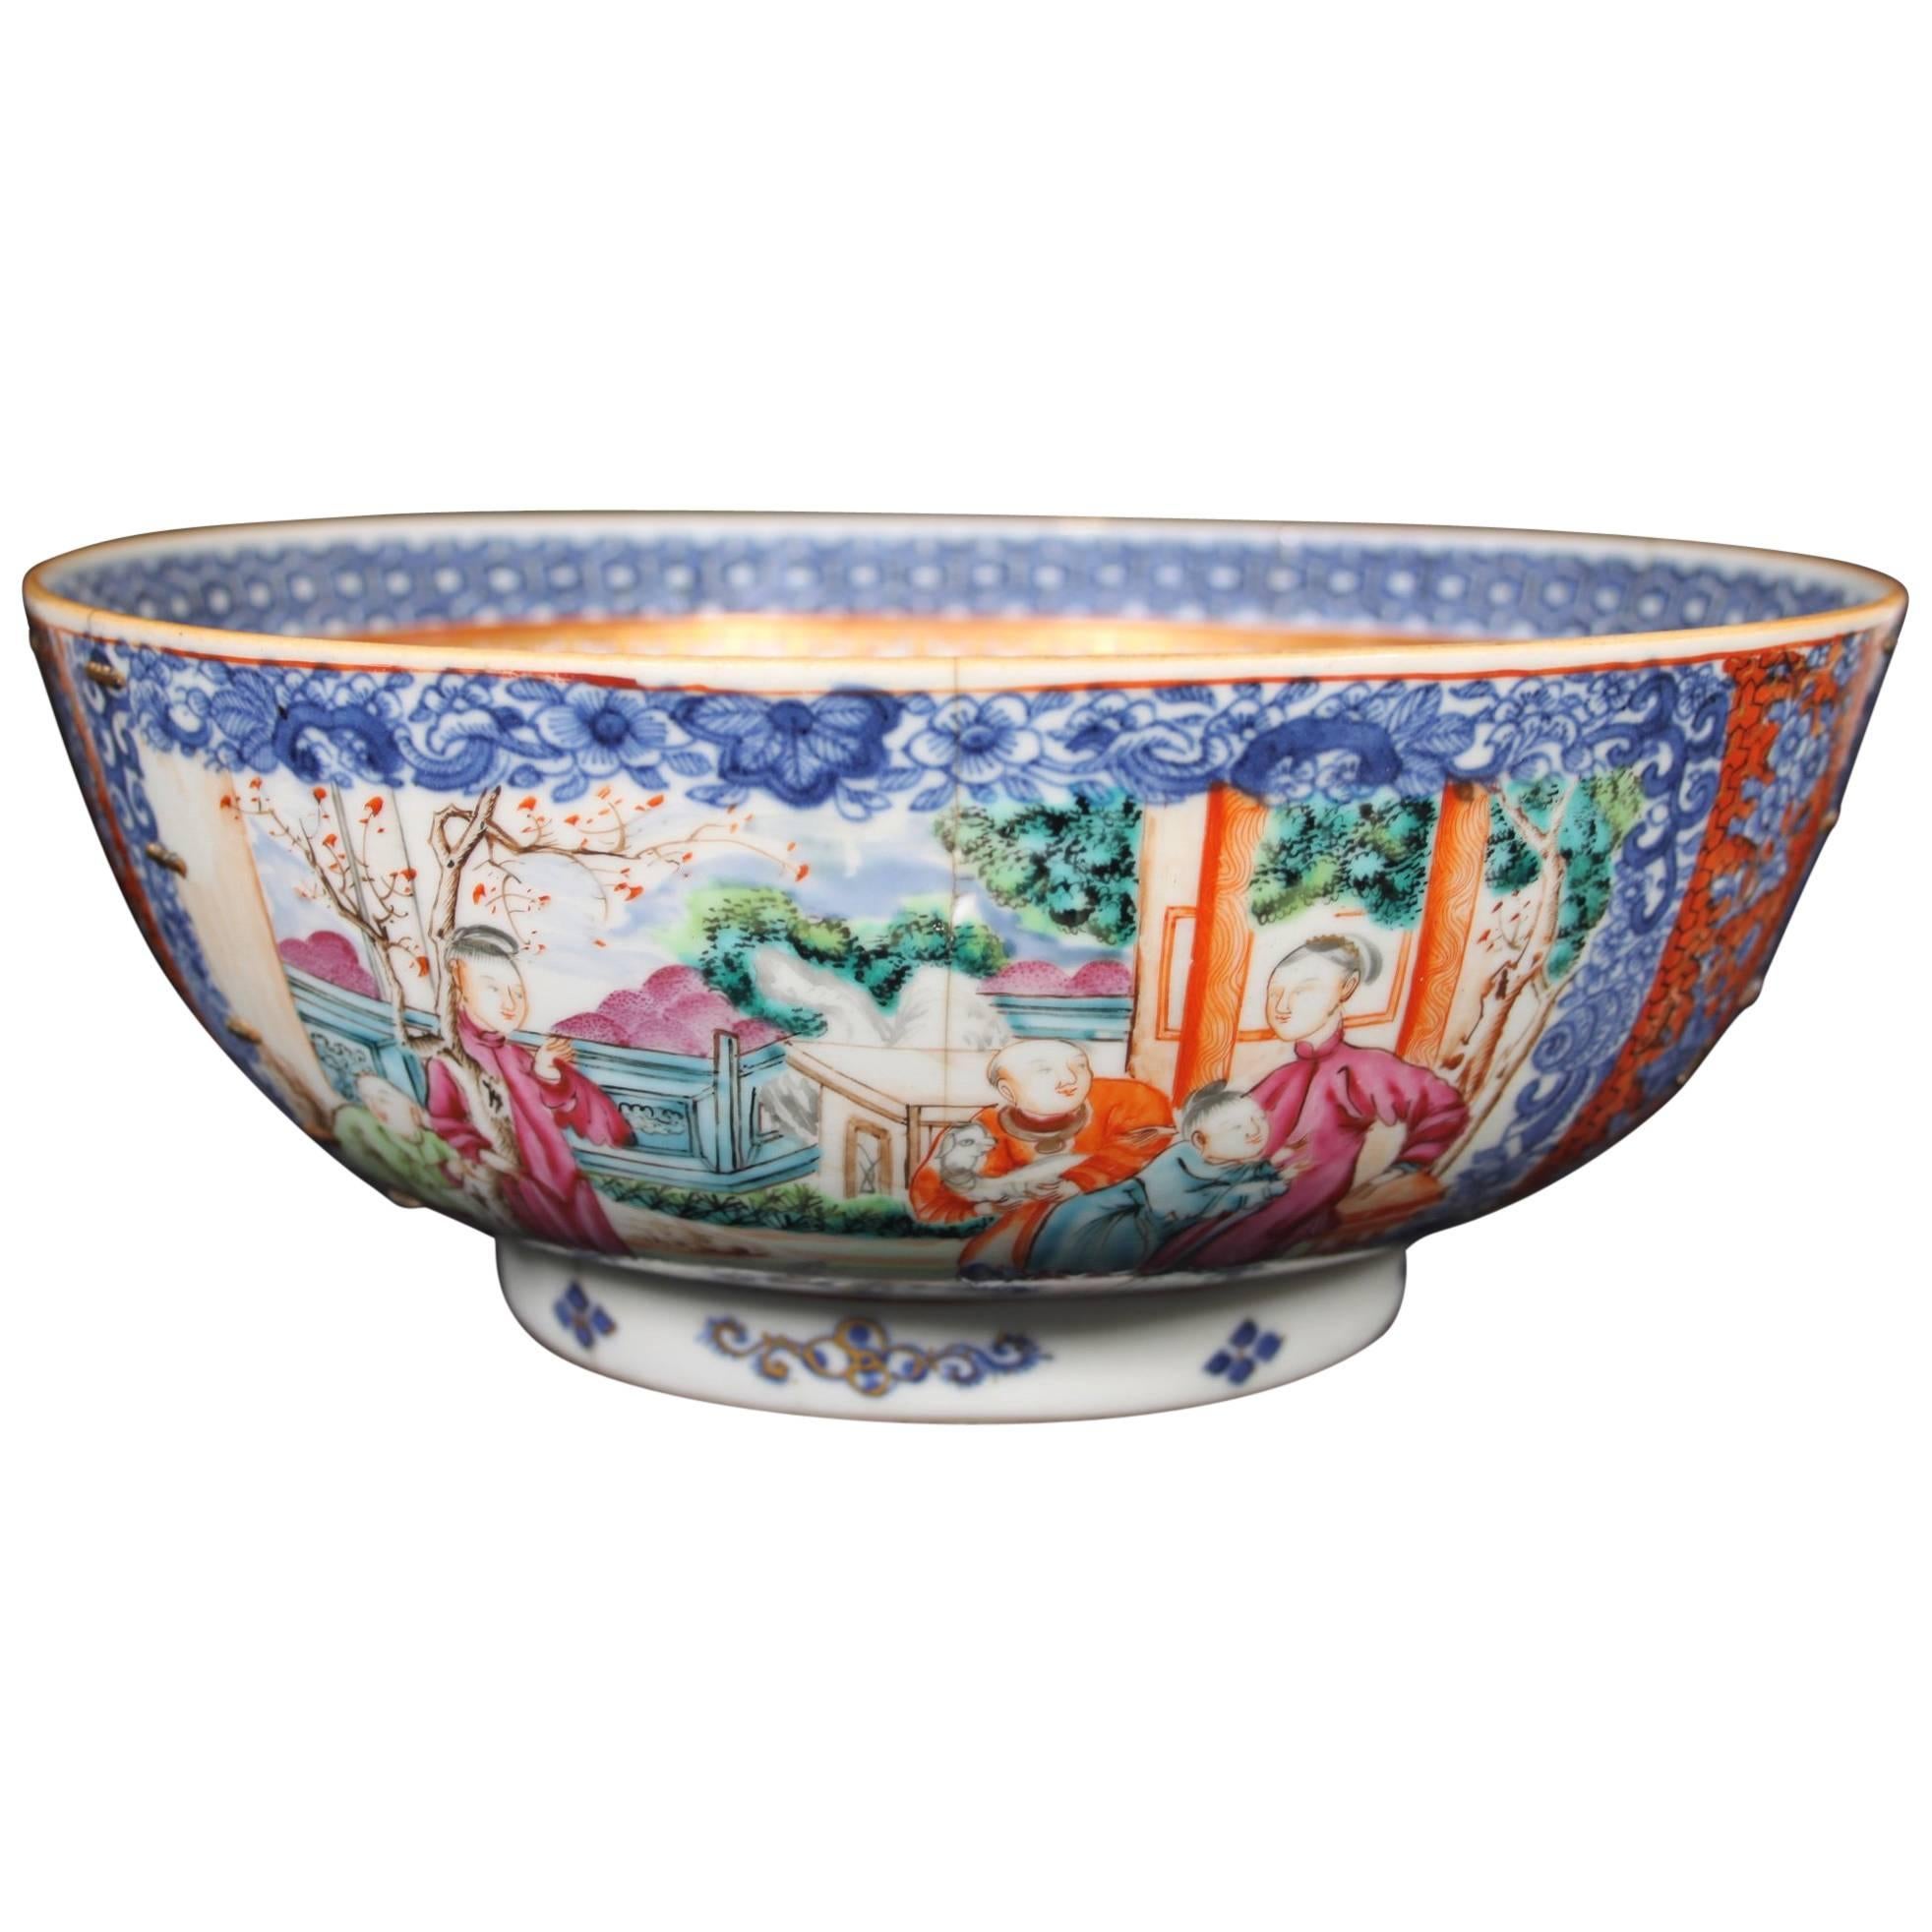 18th Century Qianlong Qing Dynasty Chinese Export Ware Porcelain Punch Bowl For Sale